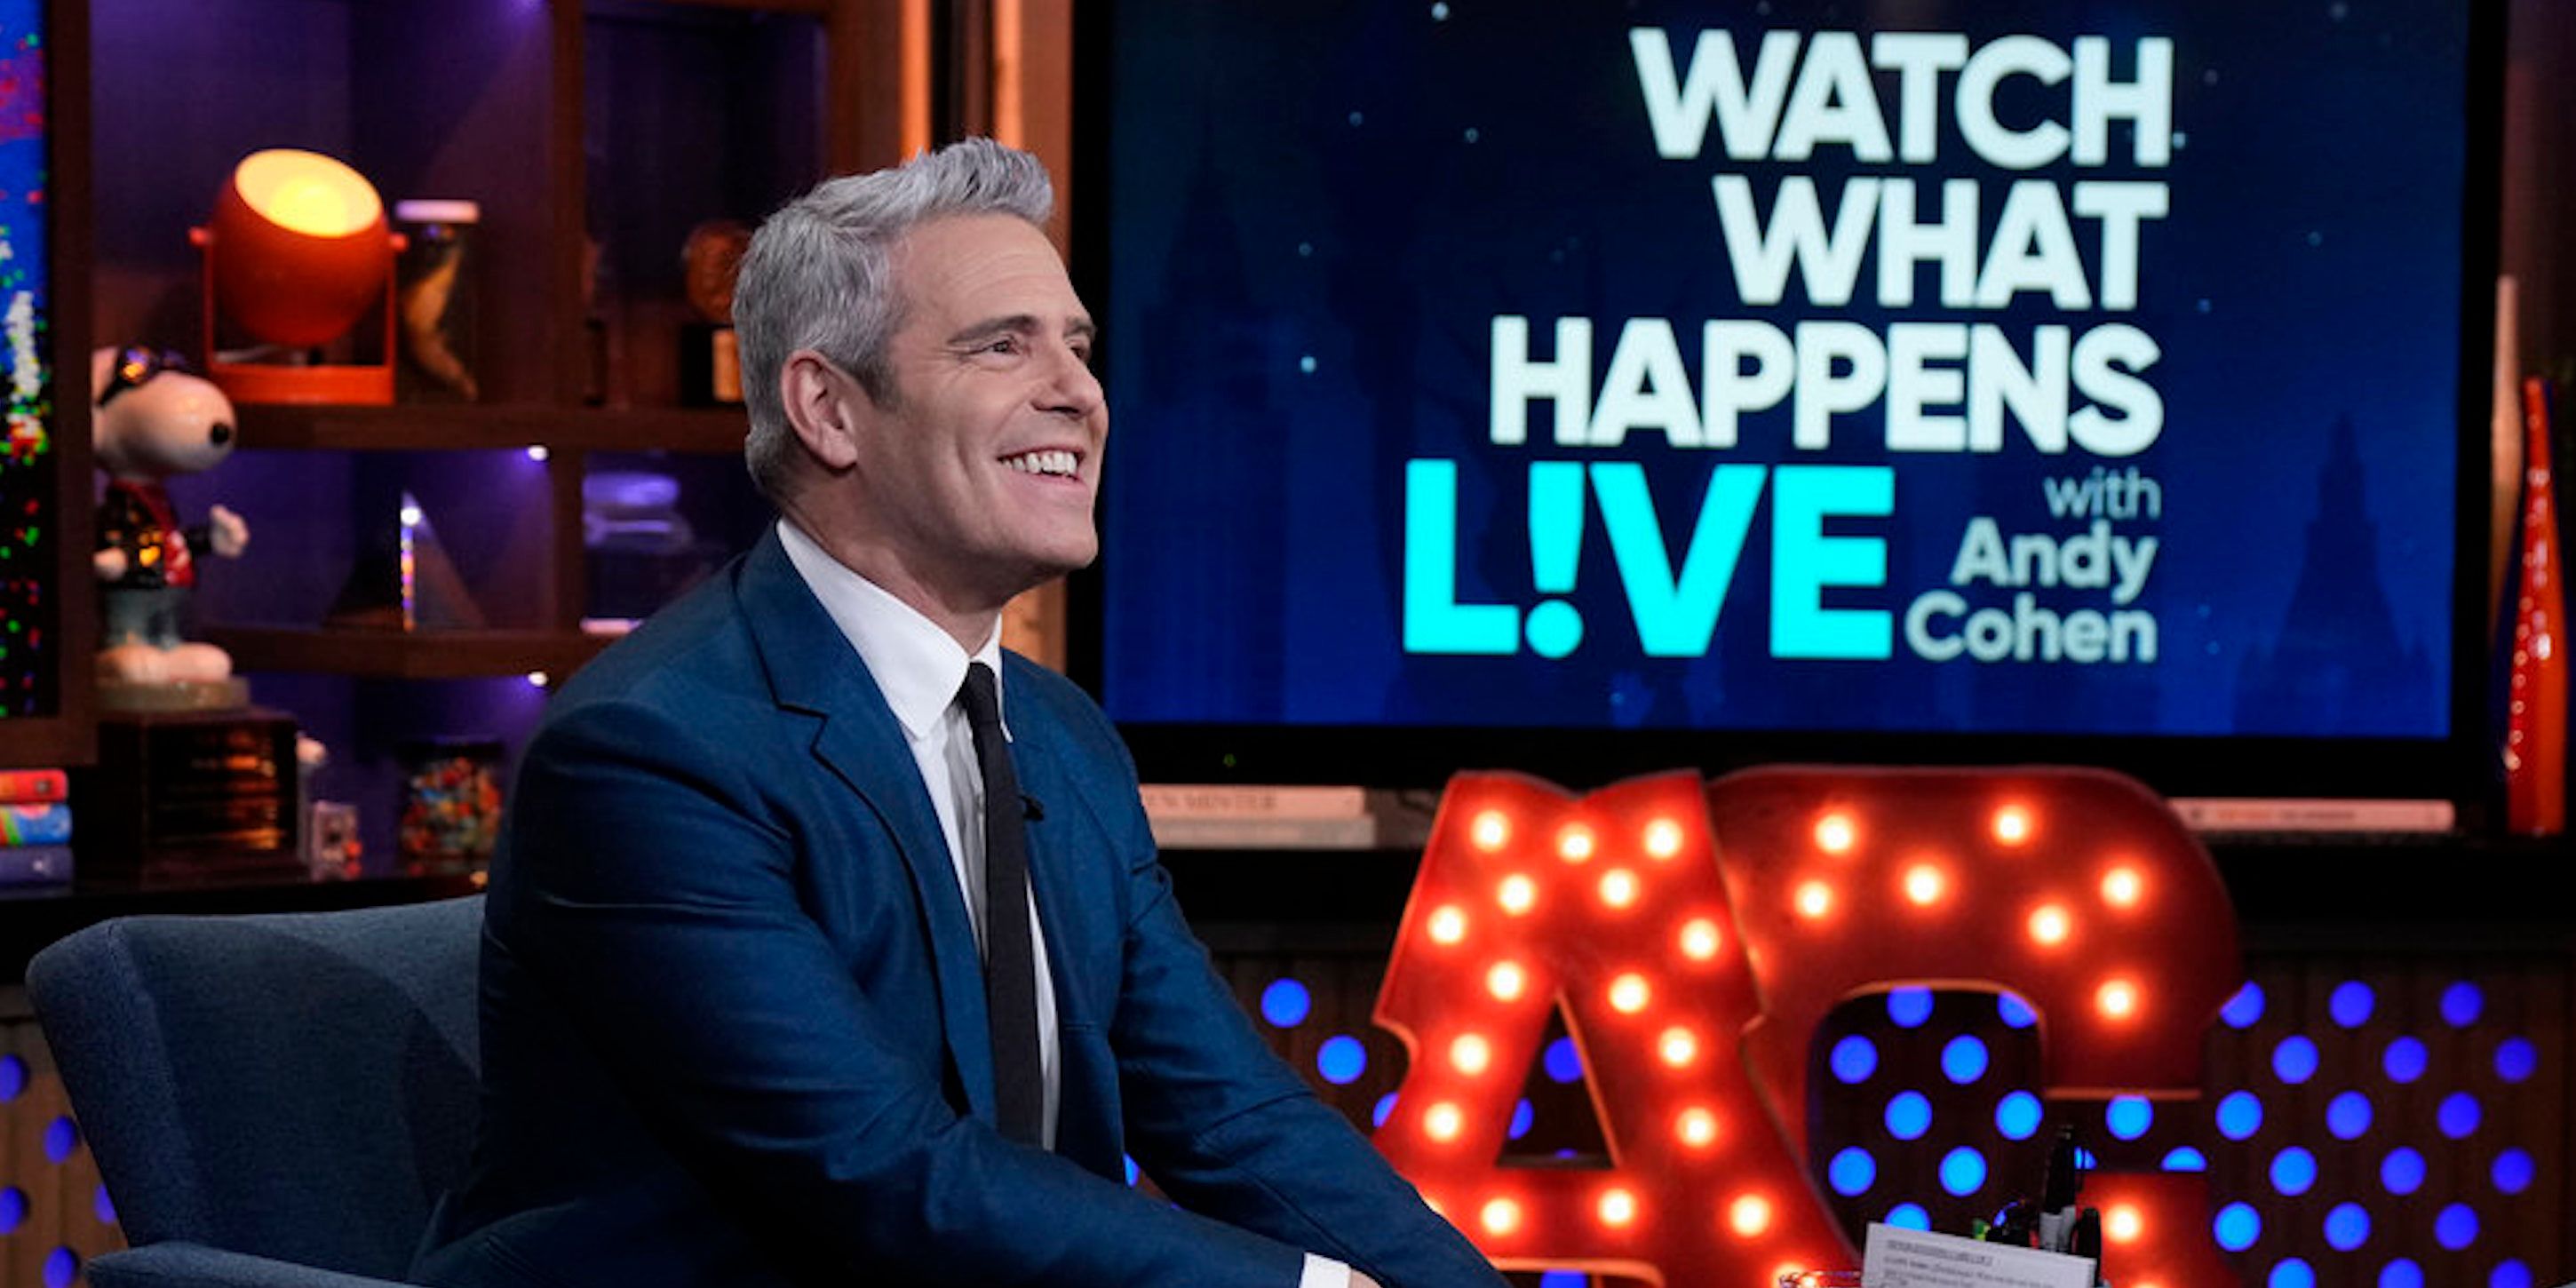 Andy Cohen smiling in his seat on the 'Watch What Happens Live'